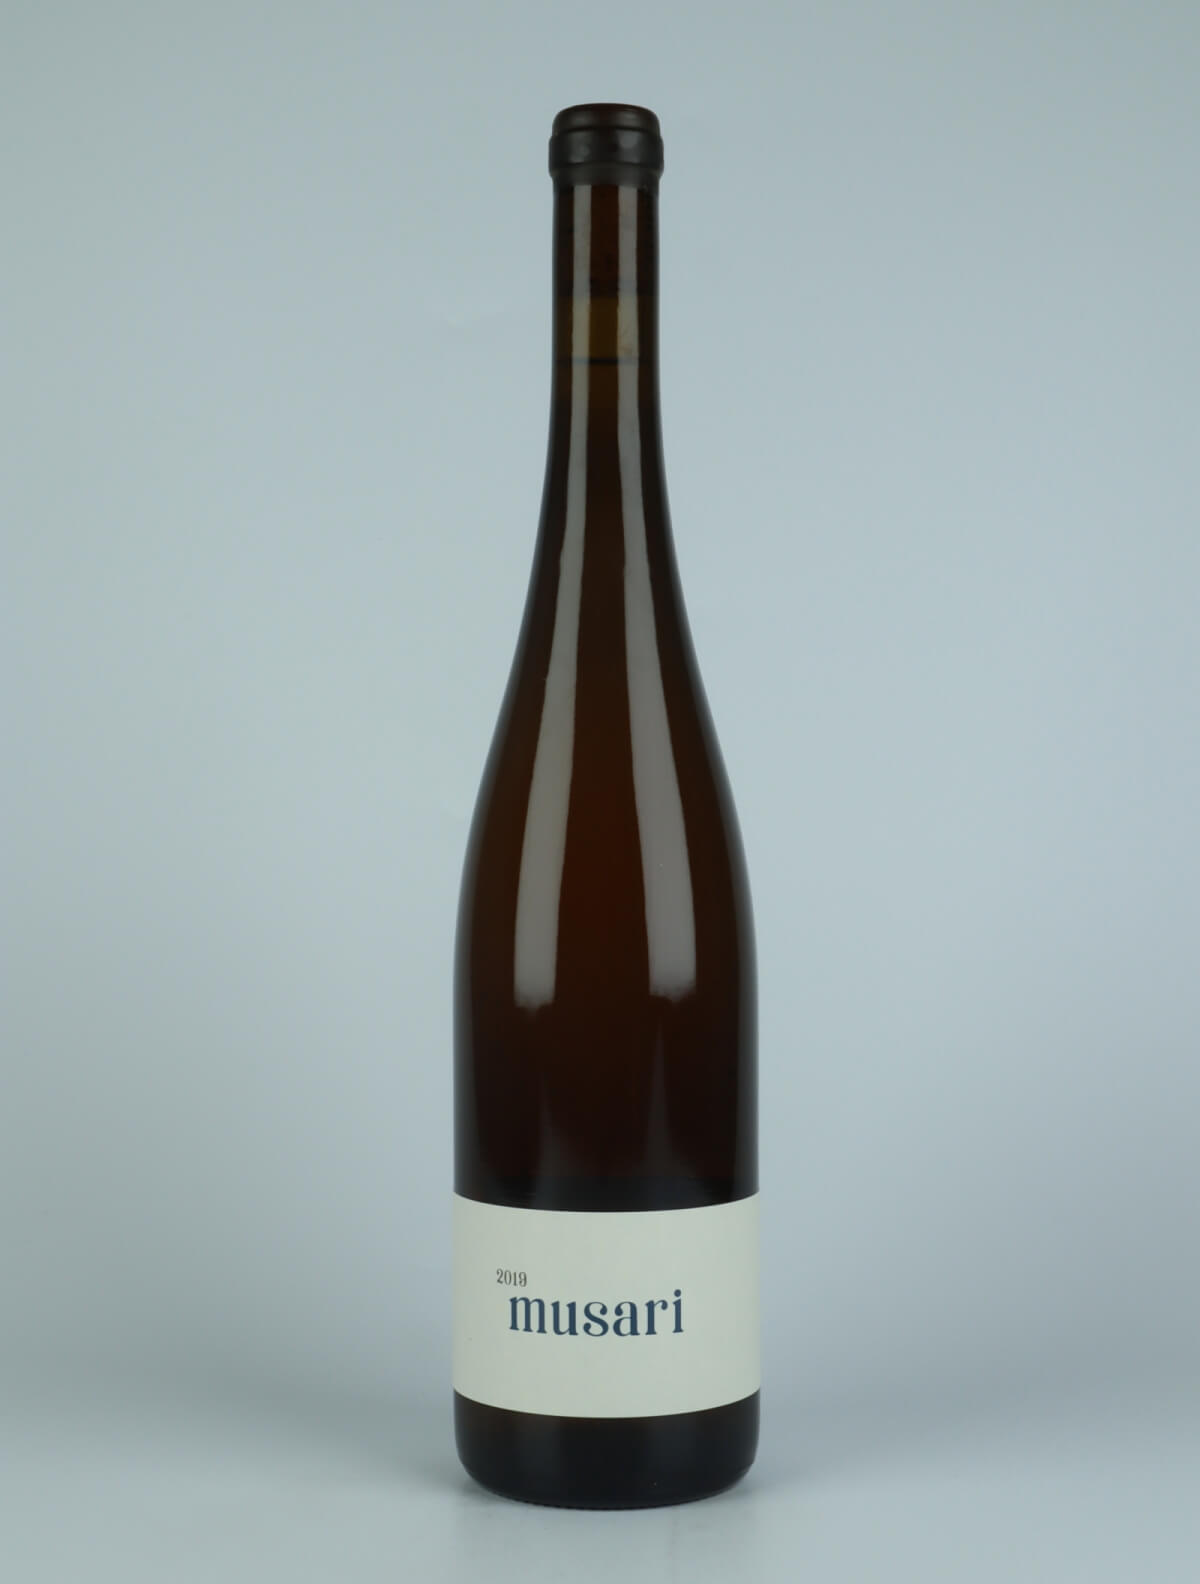 A bottle 2019 Musari White wine from Jakob Tennstedt, Mosel in Germany